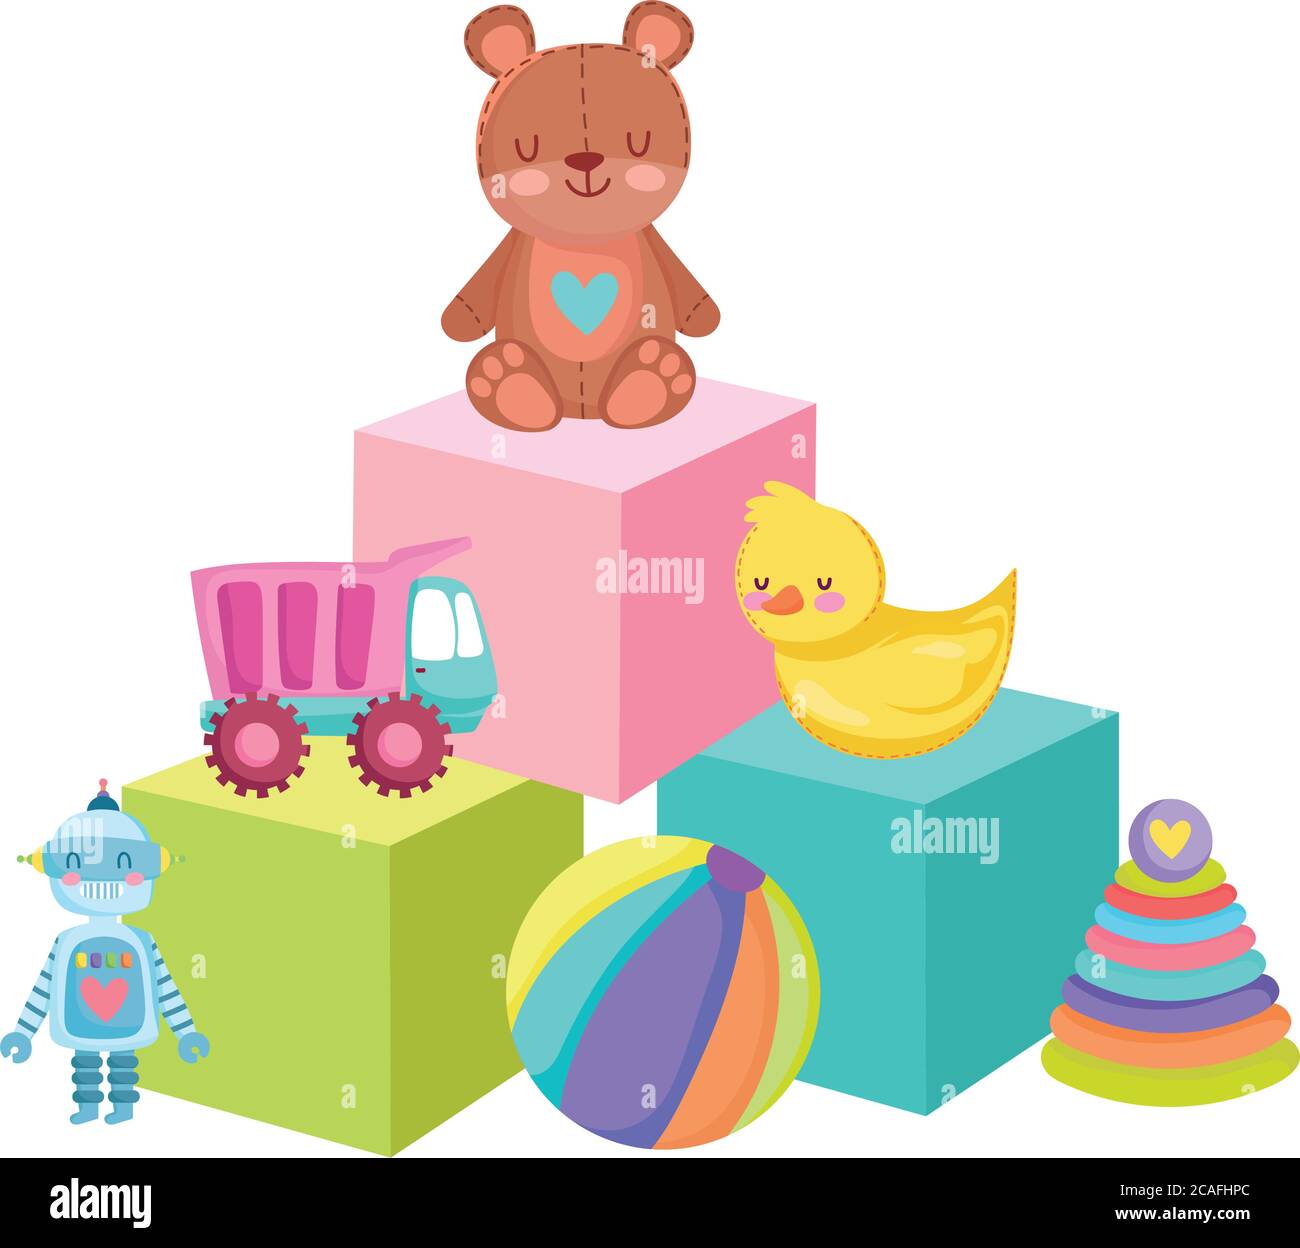 toys object for small kids to play cartoon, bear duck truck ball robot and pyramid on blocks vector illustration Stock Vector